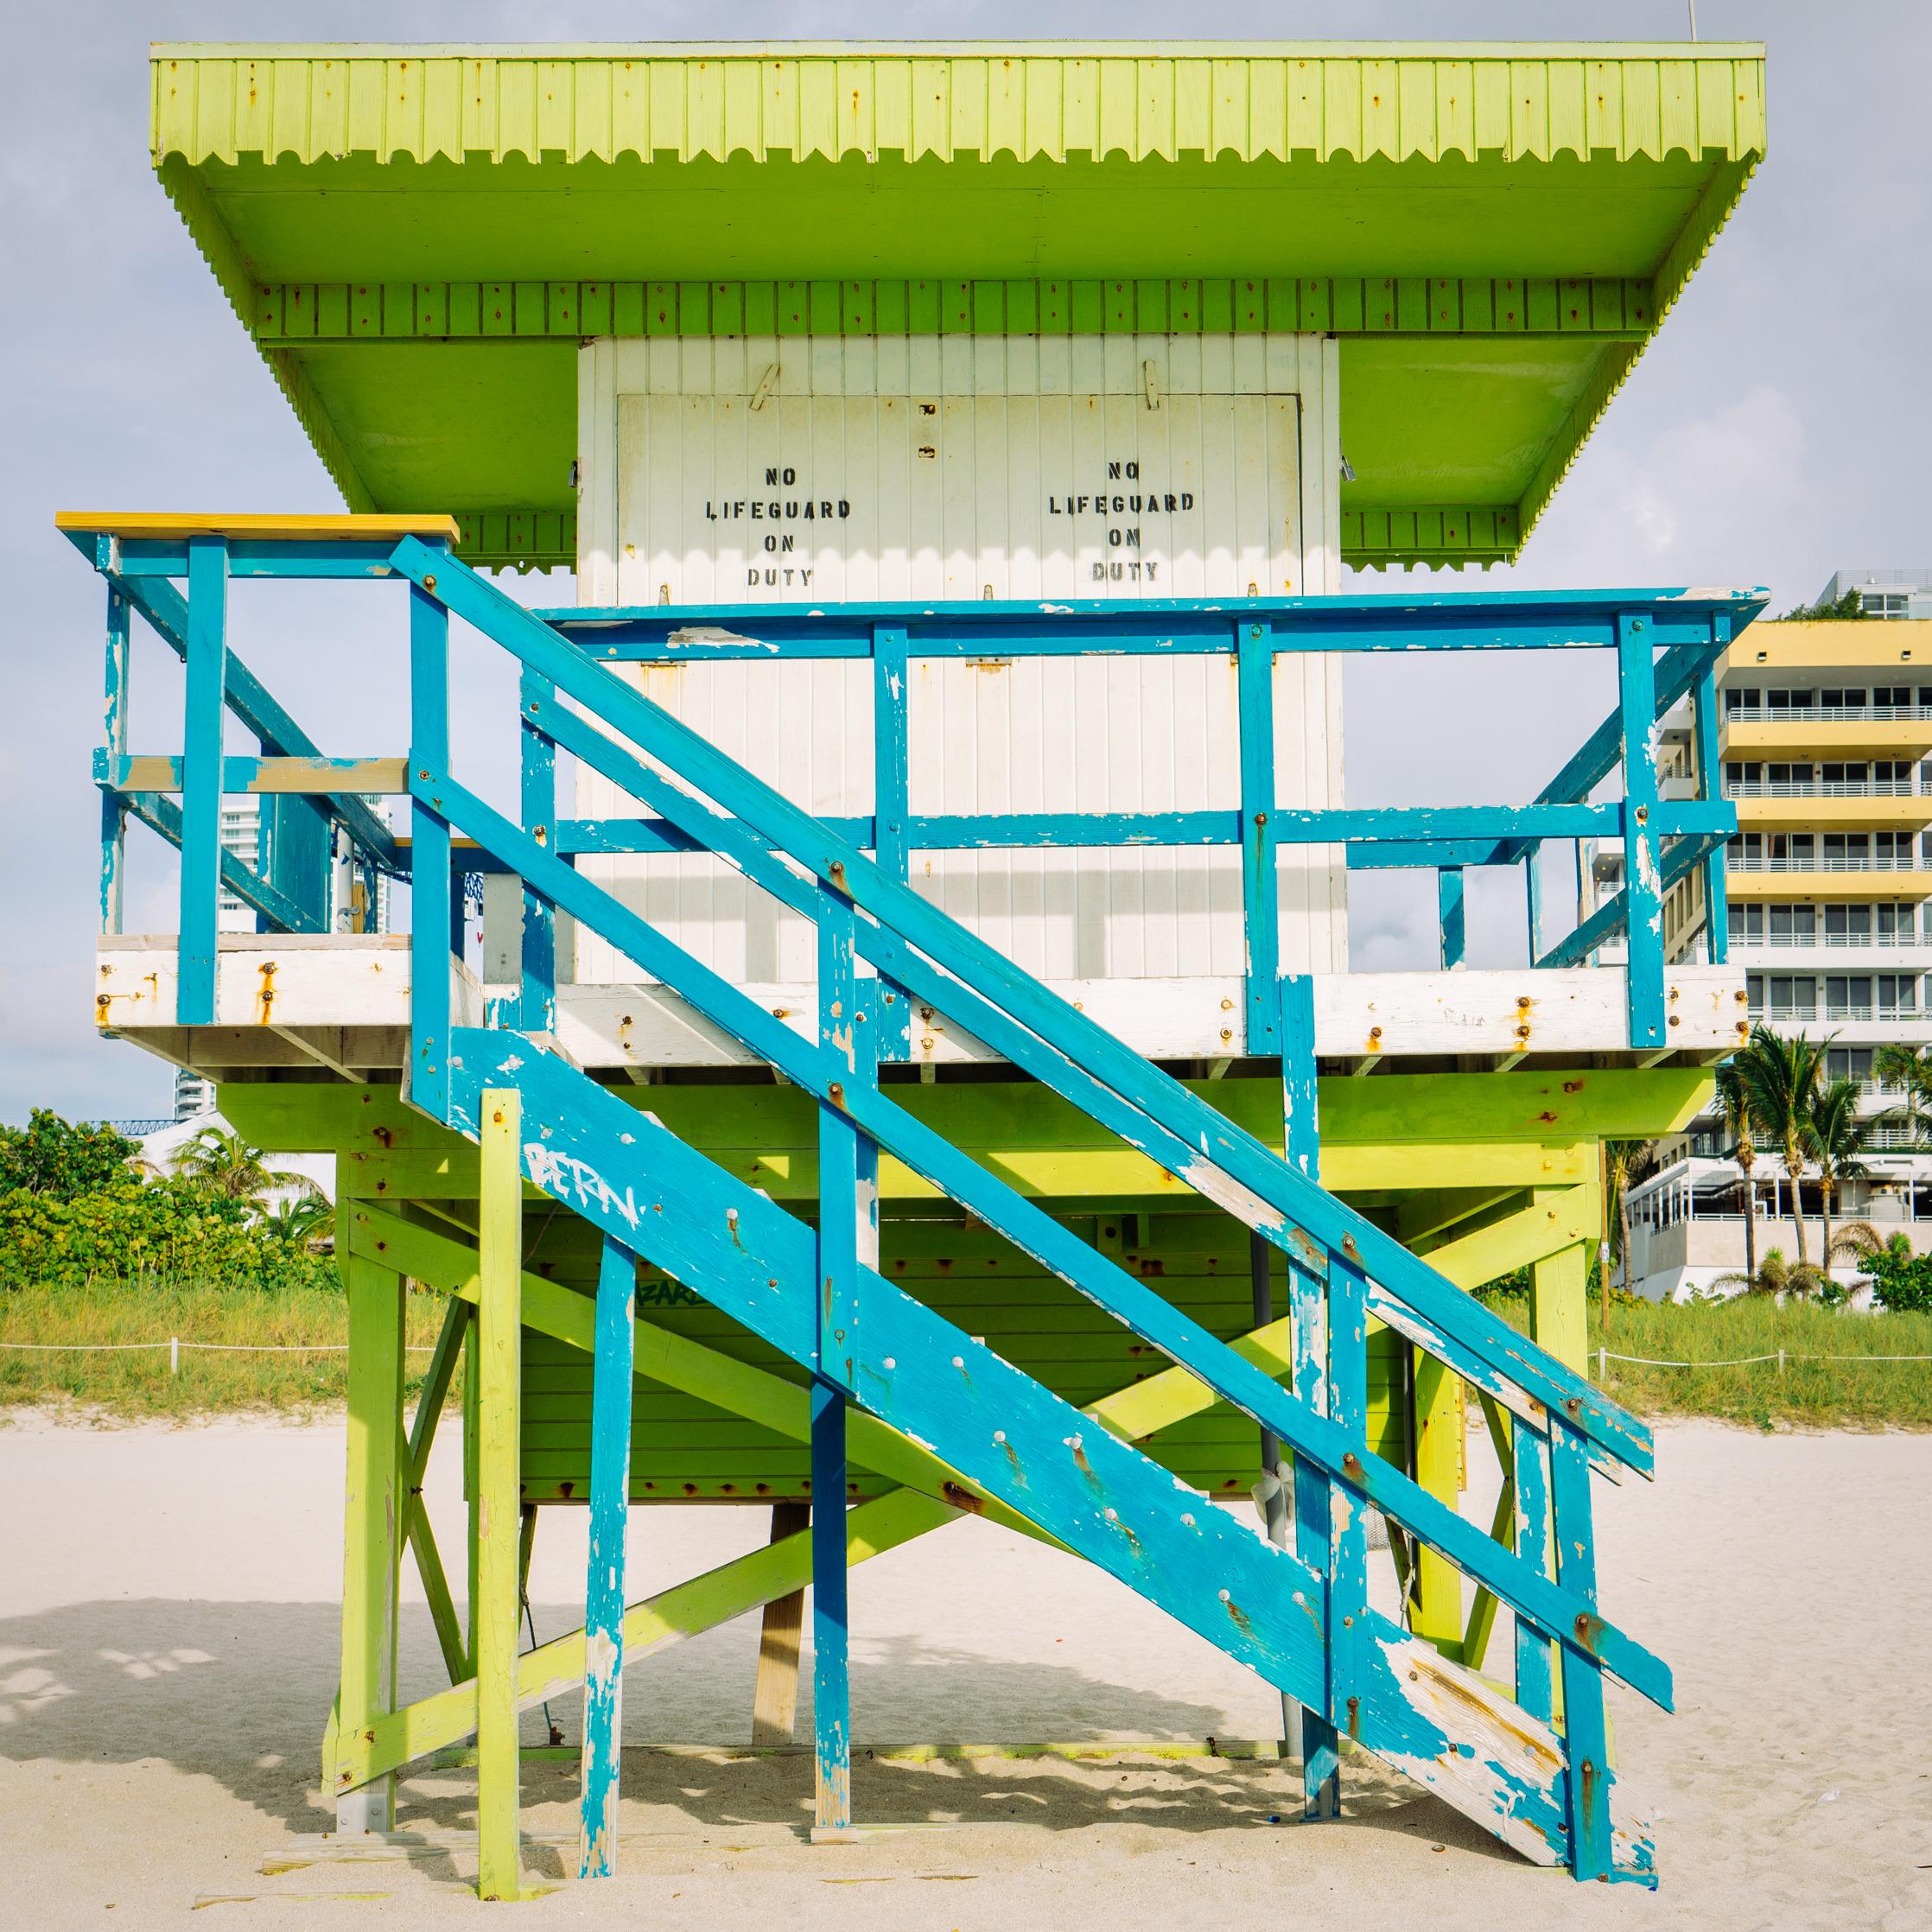 Peter Mendelson Abstract Photograph - "1st St. Miami Lifeguard Stand - Front View, " Contemporary Photograph, 30" x 30"